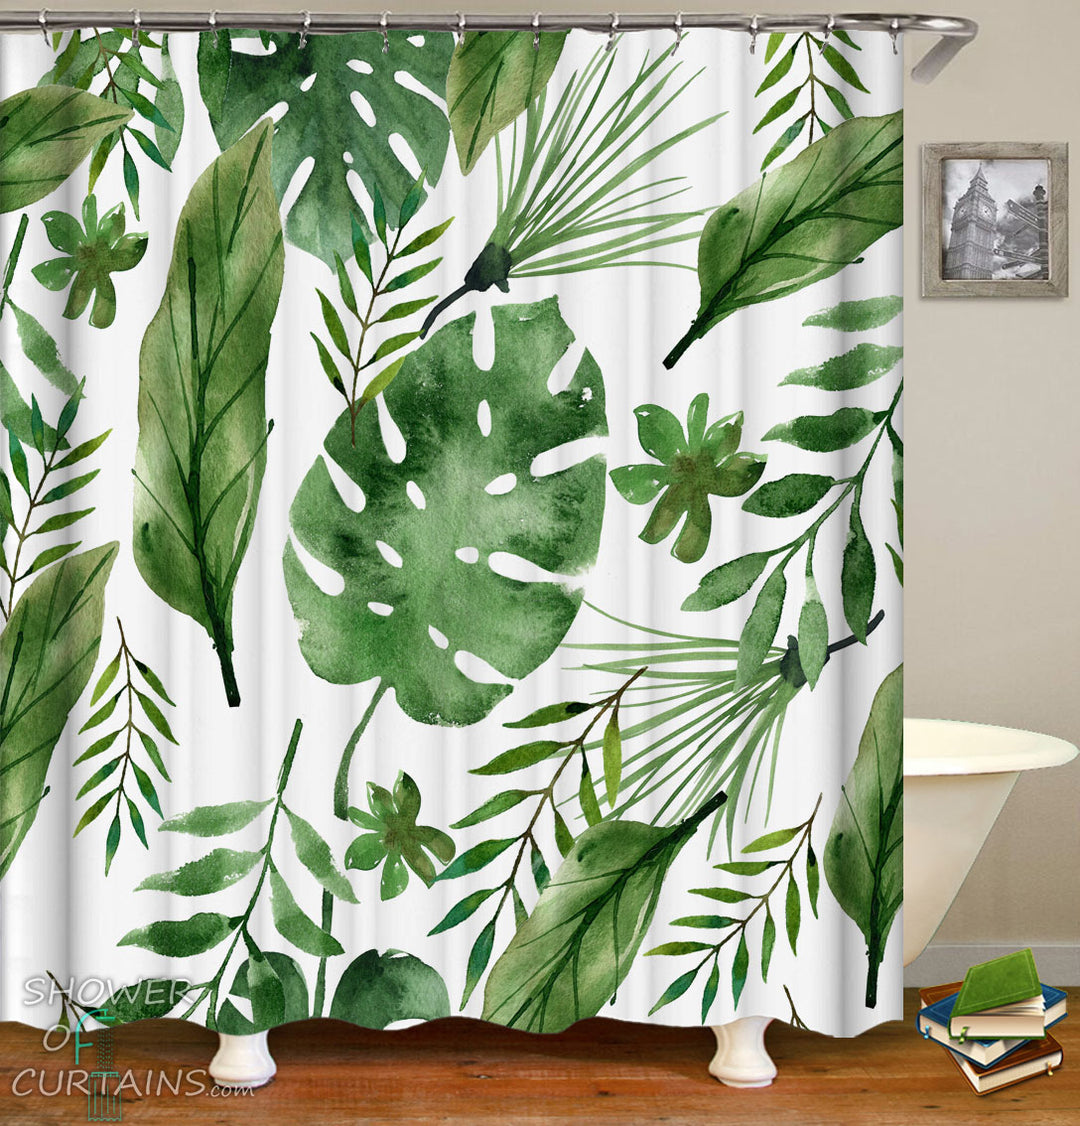 Leaf Shower Curtain - Simple Green Leaves Painting